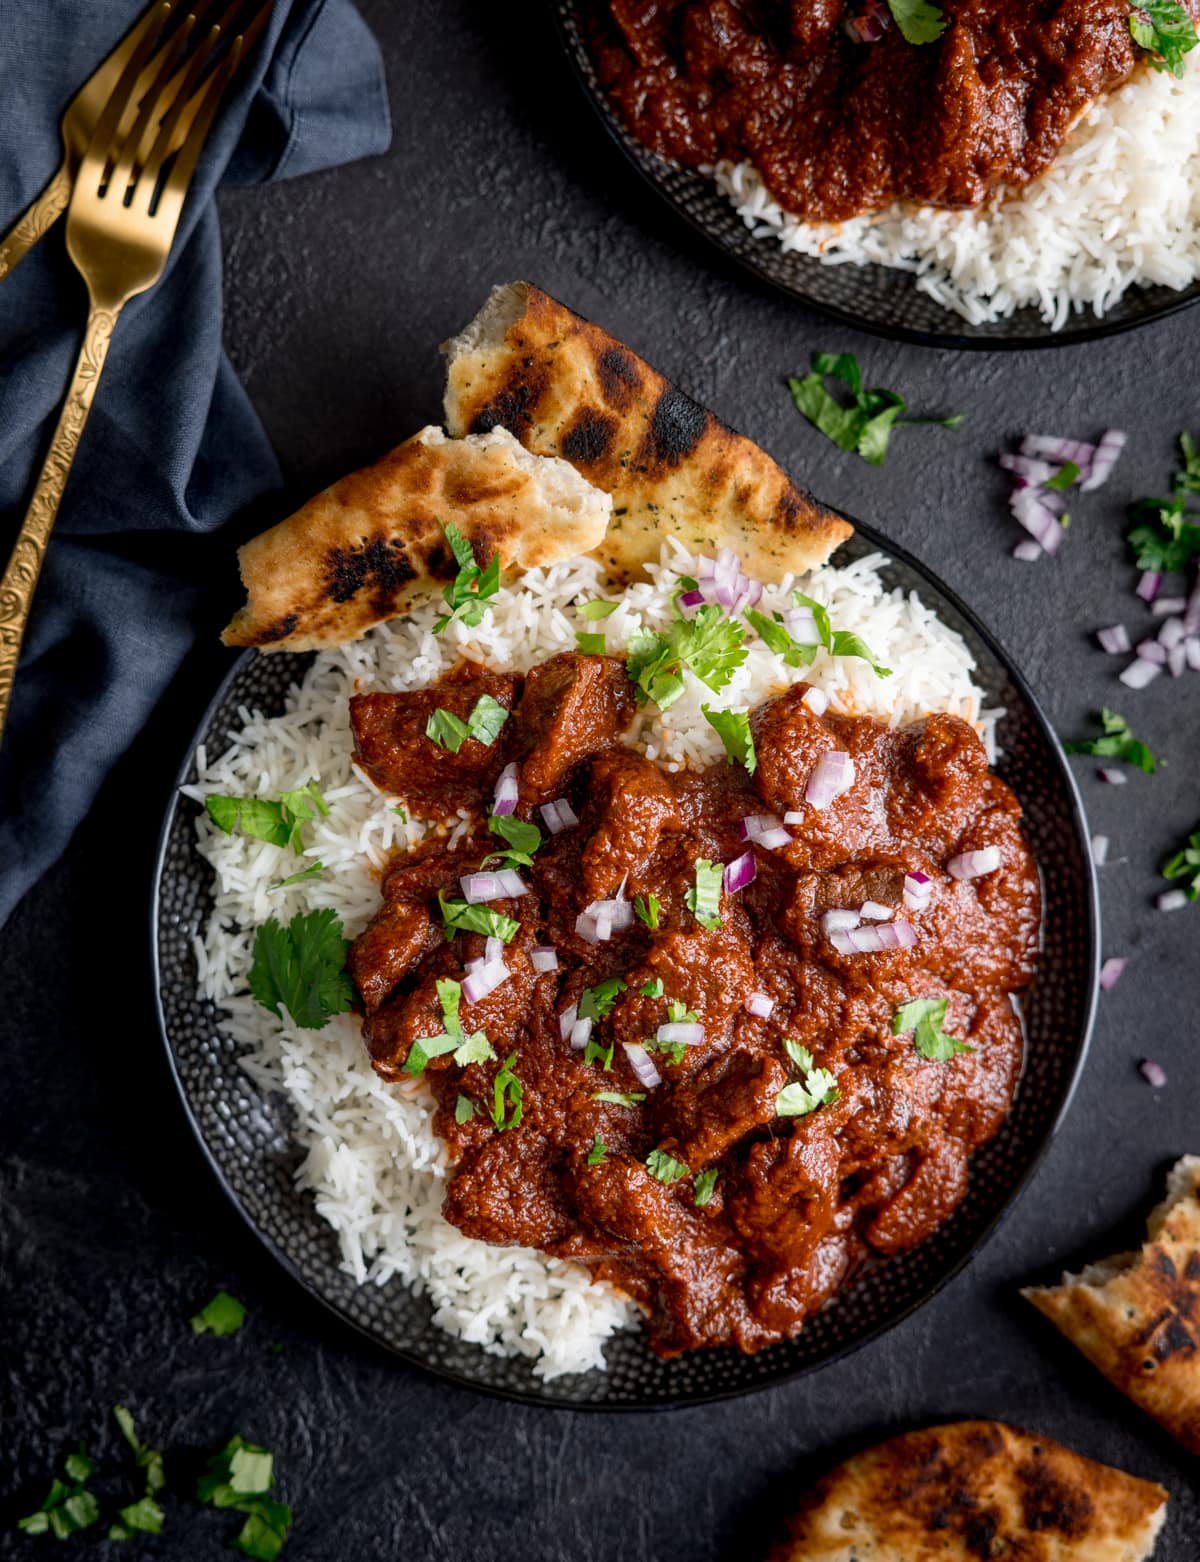 Tall overhead image of slow cooked beef madras in a black bowl with rice and pieces of naan bread. There is coriander (cilantro) sprinkled on top. The bowl is on a dark surface, next to a blue napkin, gold fork, more coriander and naan, and a further bowl of madras.